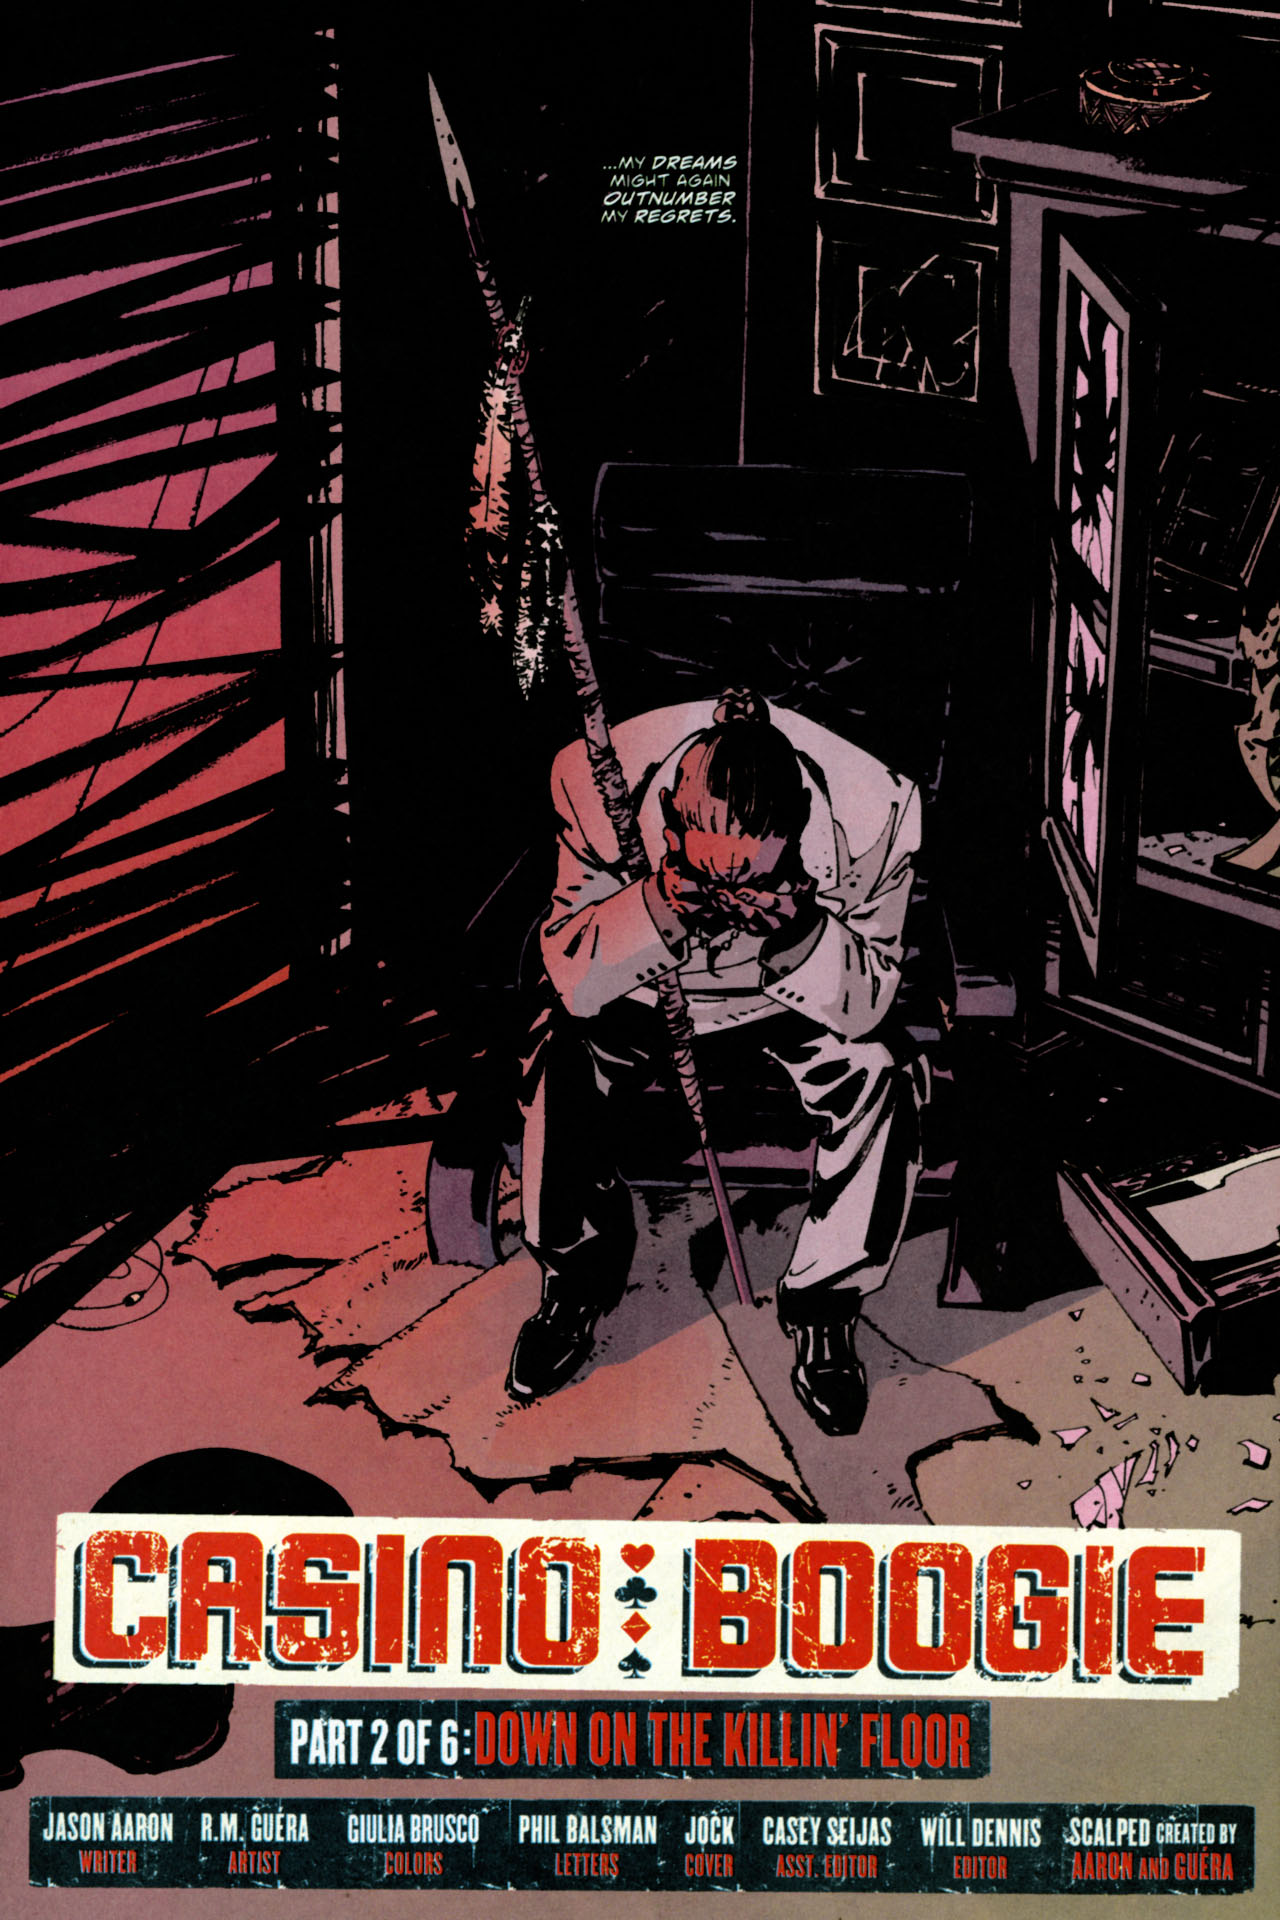 Scalped #7 - Casino Boogie, Part 2 of 6: Down on the Killin' Floor 